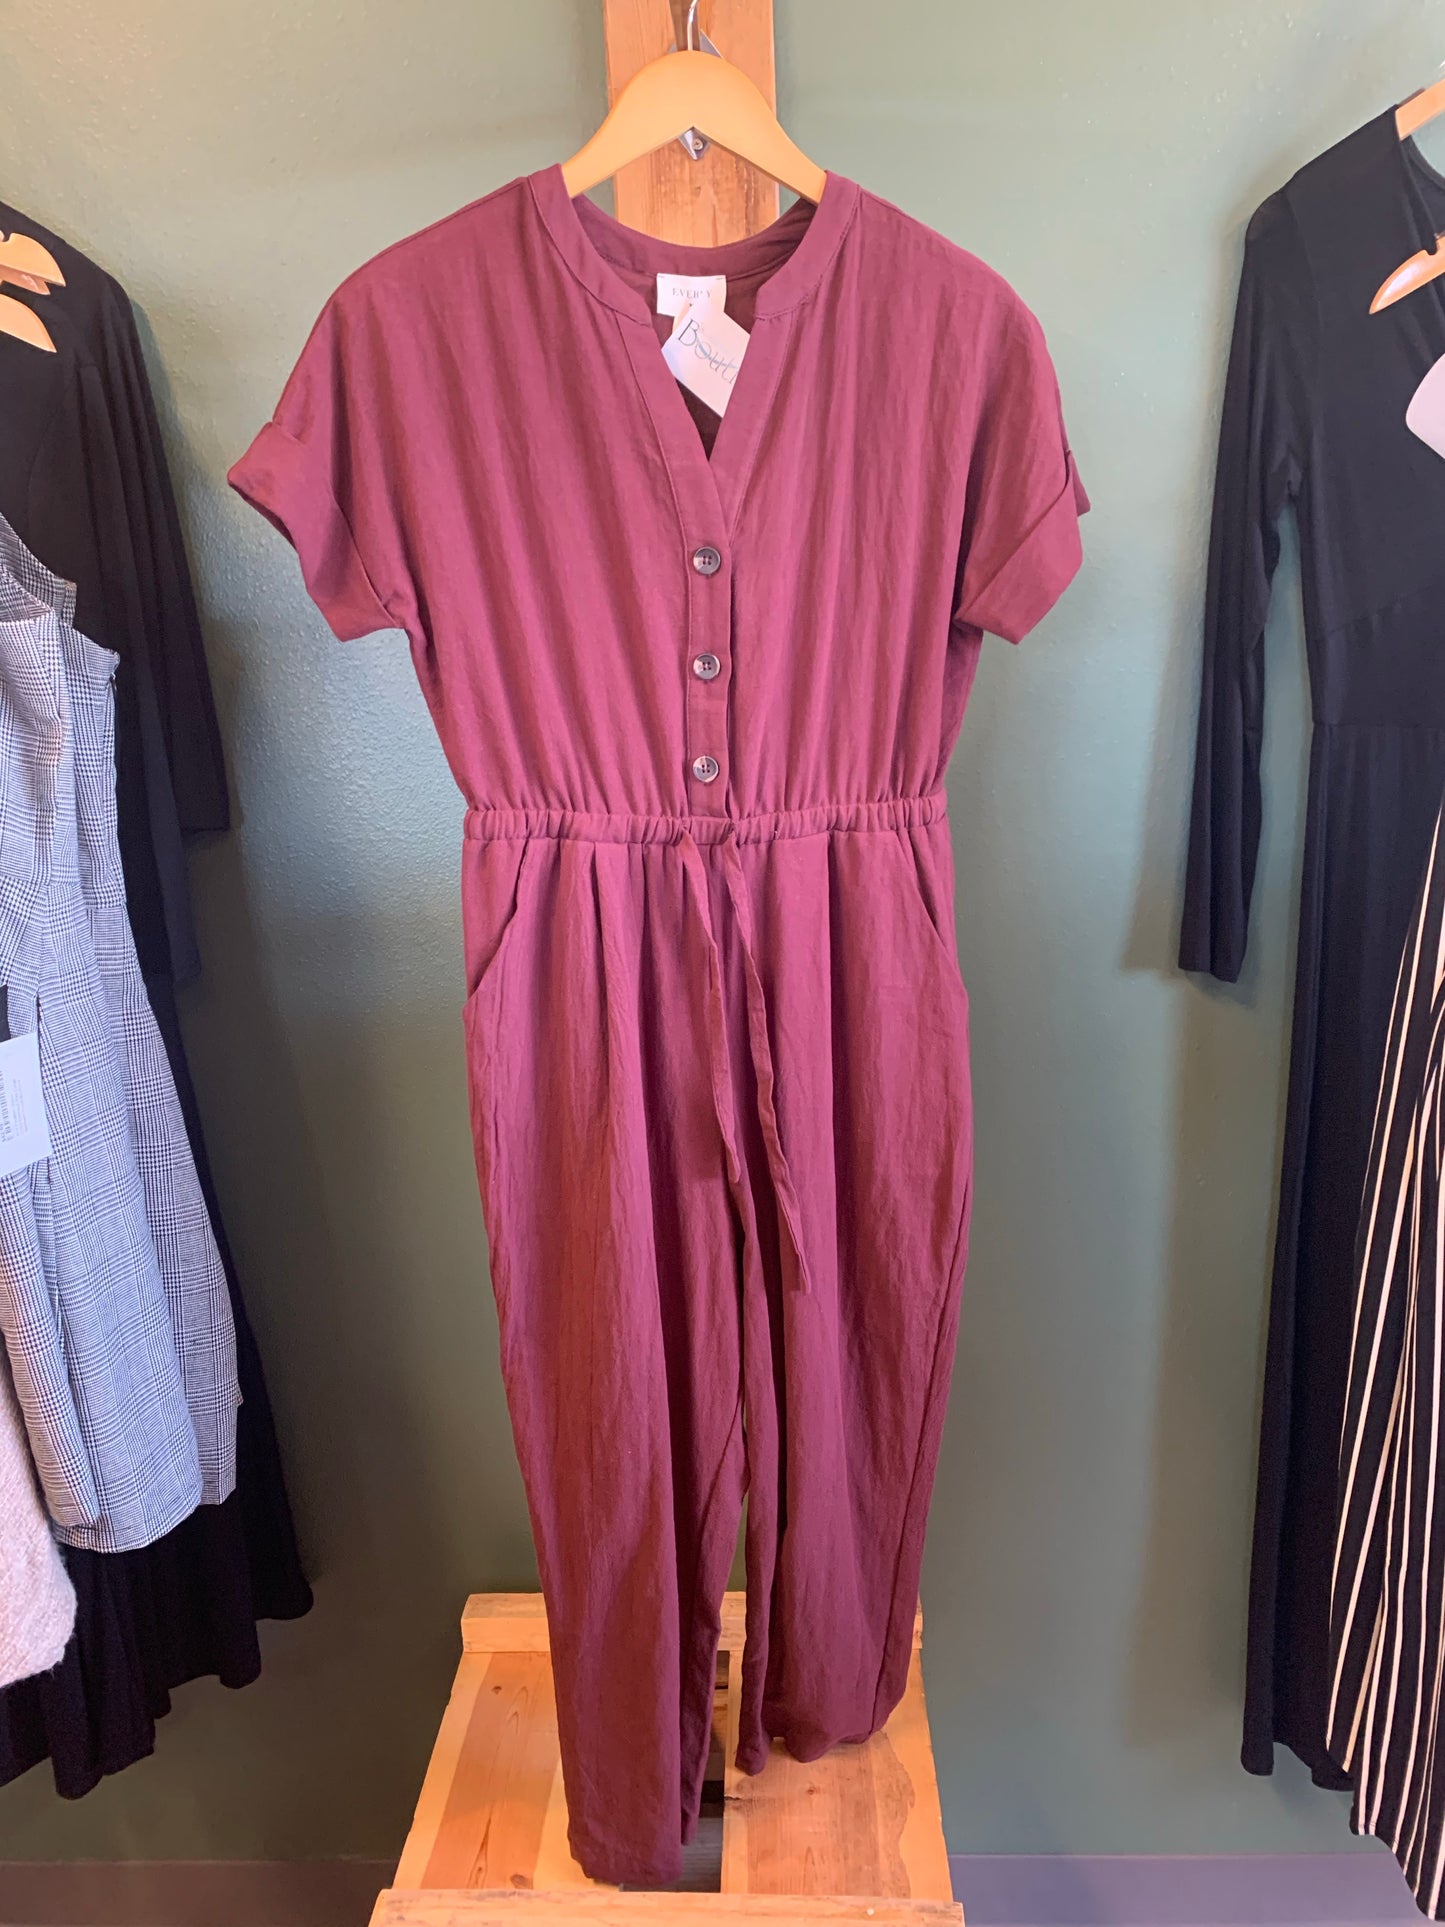 Solid Woven Jumpsuit